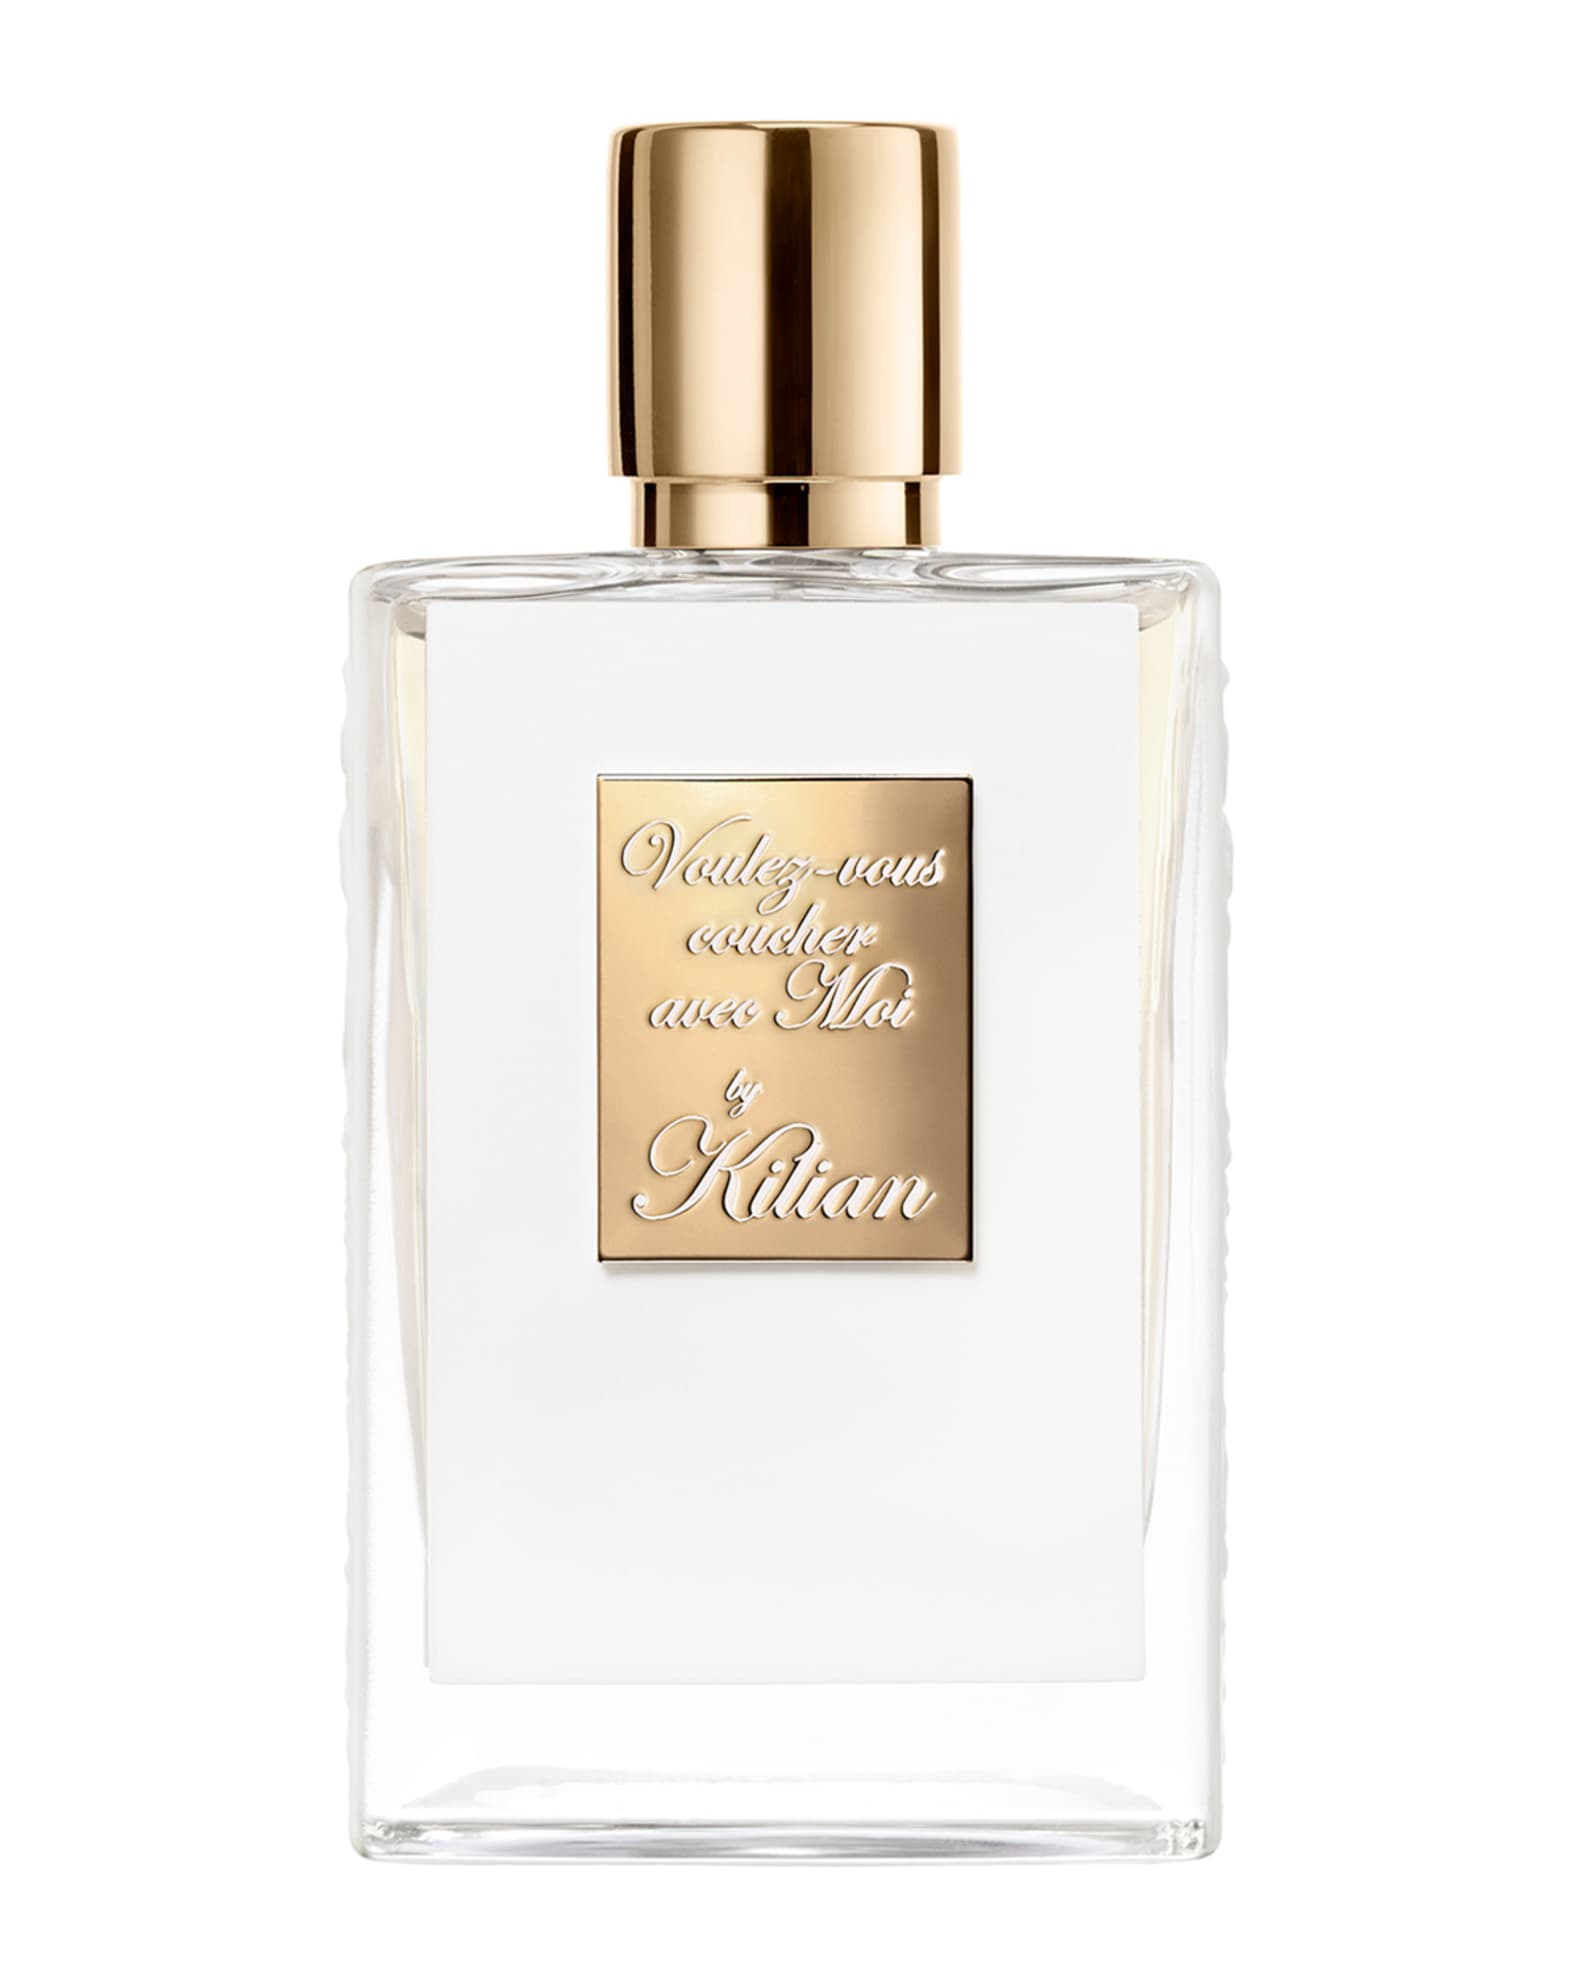 Perfumes Wiki Review & Notes